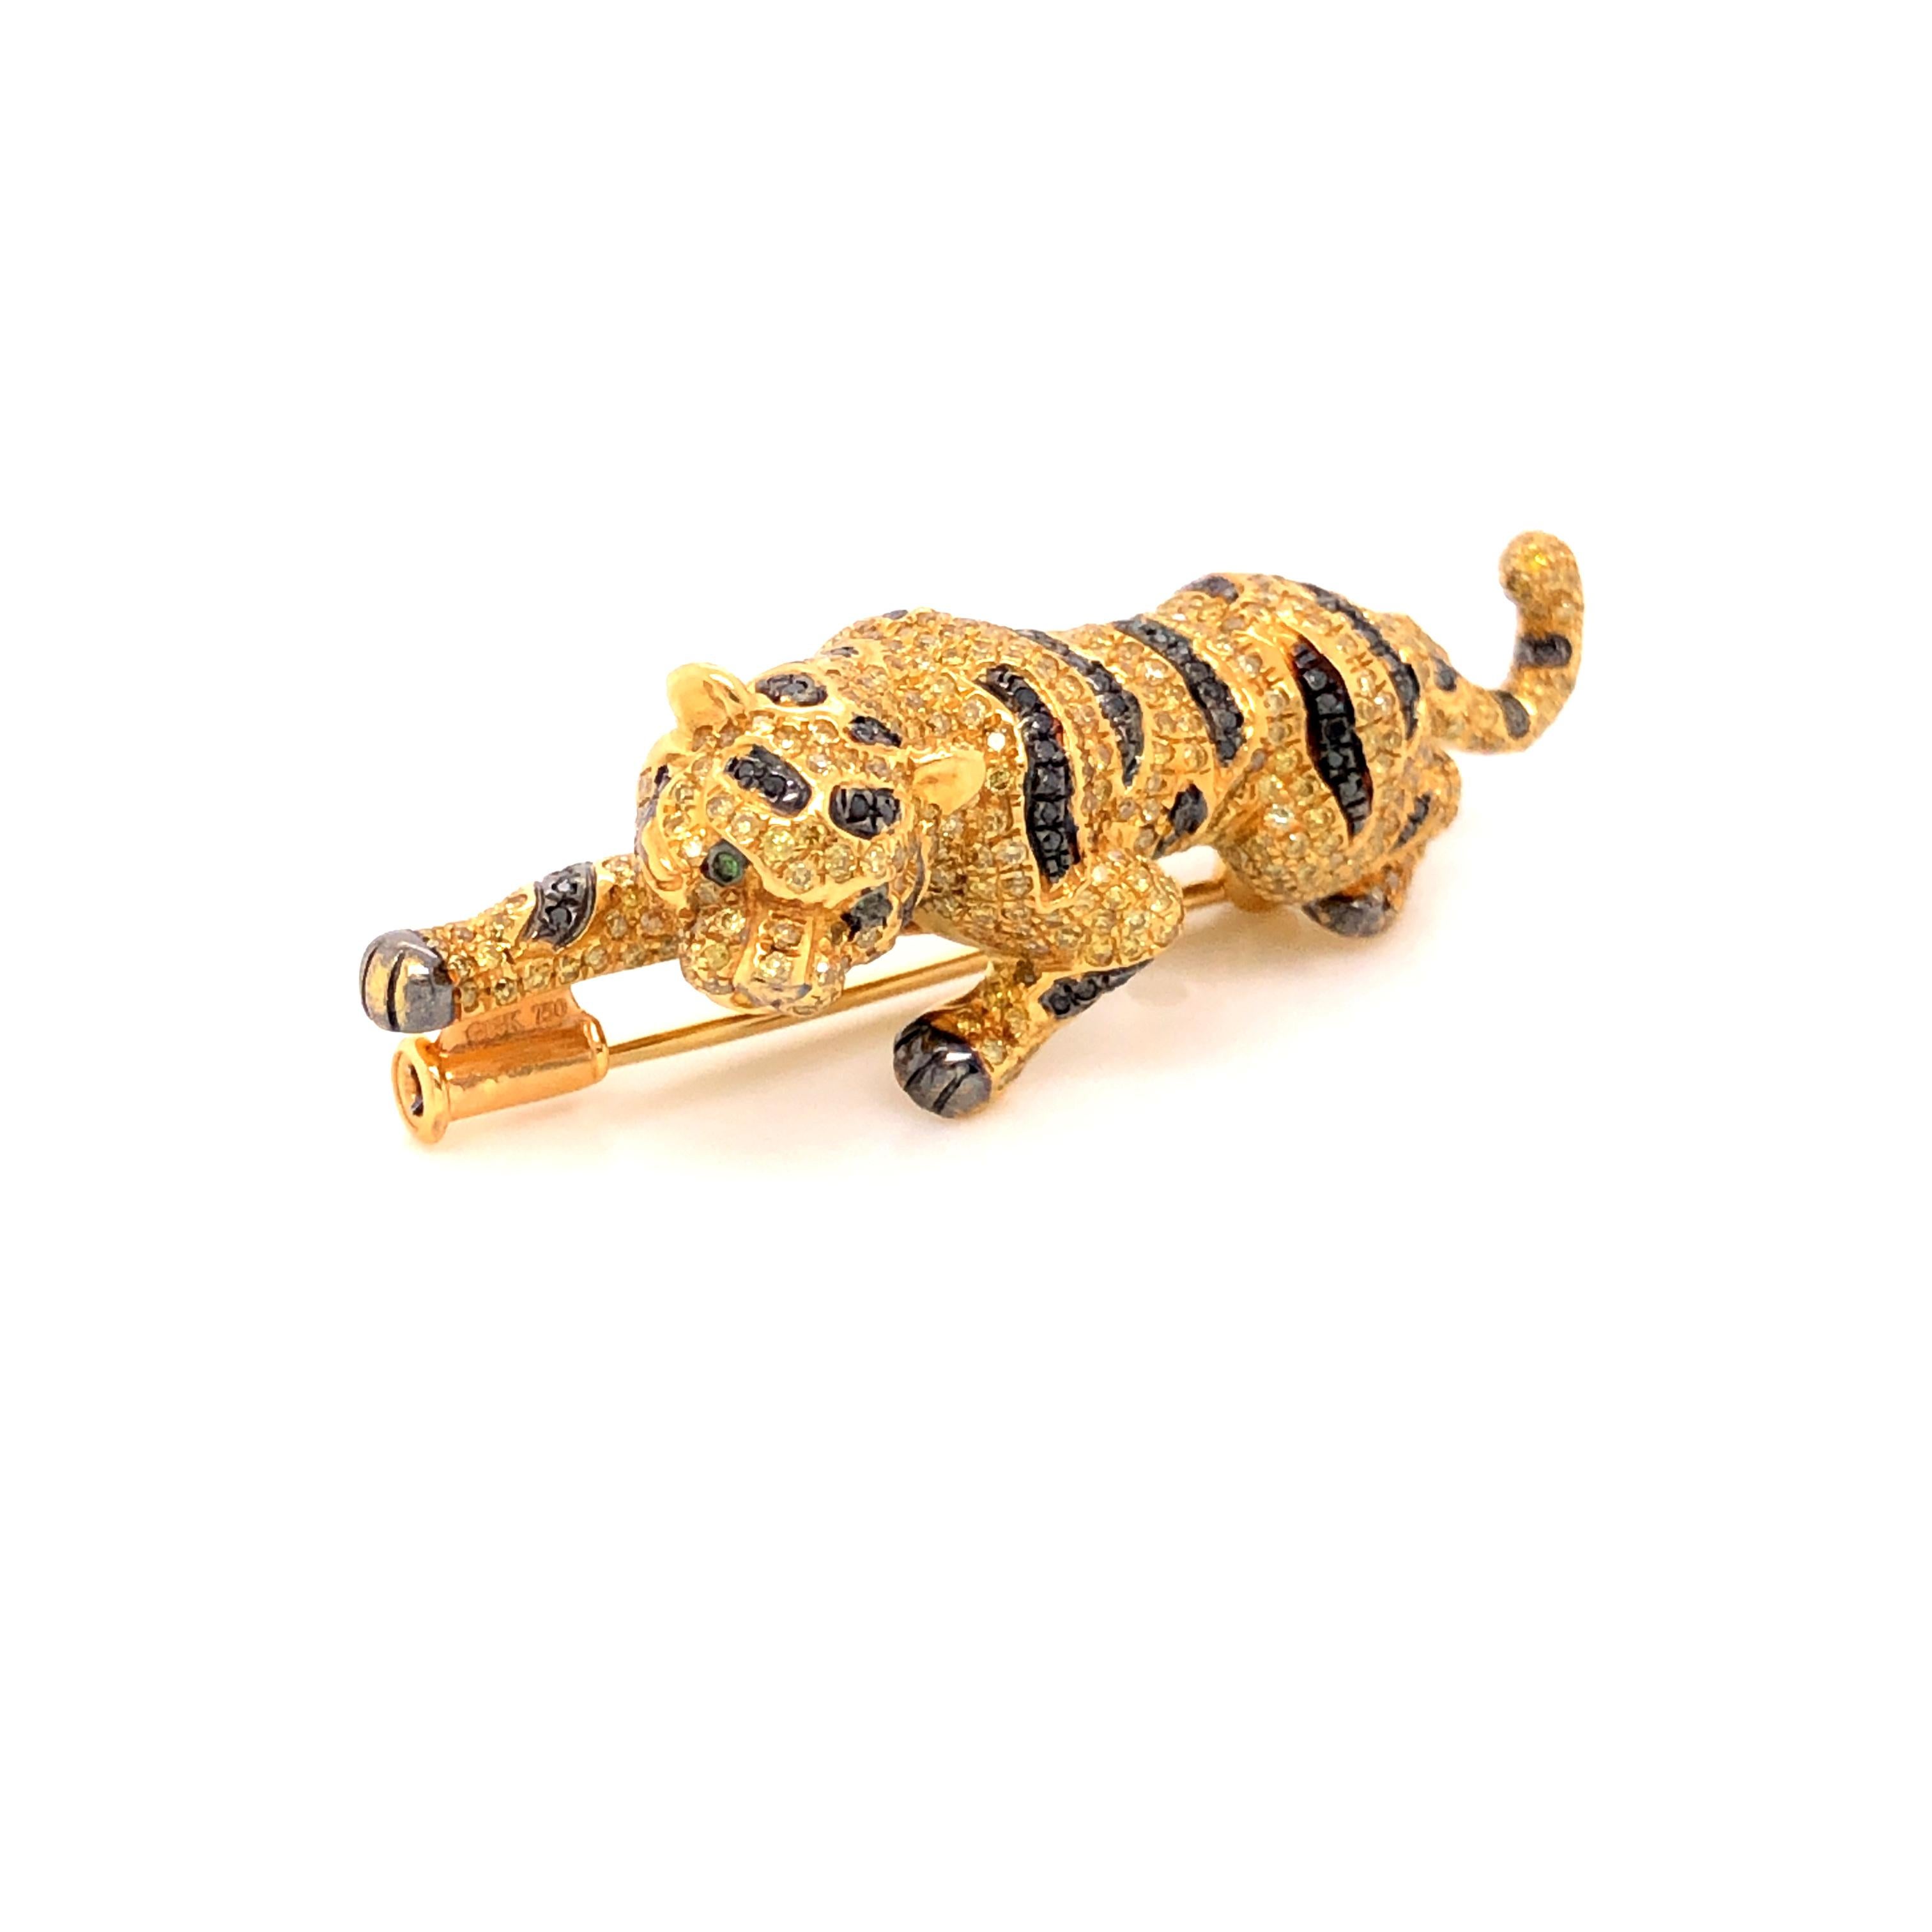 The Black Diamonds and Fancy Coloured Diamonds Leaping Tigress Brooch and Pendant is a breath-taking fusion of power and luxury. Crafted with intricate artistry, this piece portrays a fierce tigress captured mid-leap, exuding strength and grace. The